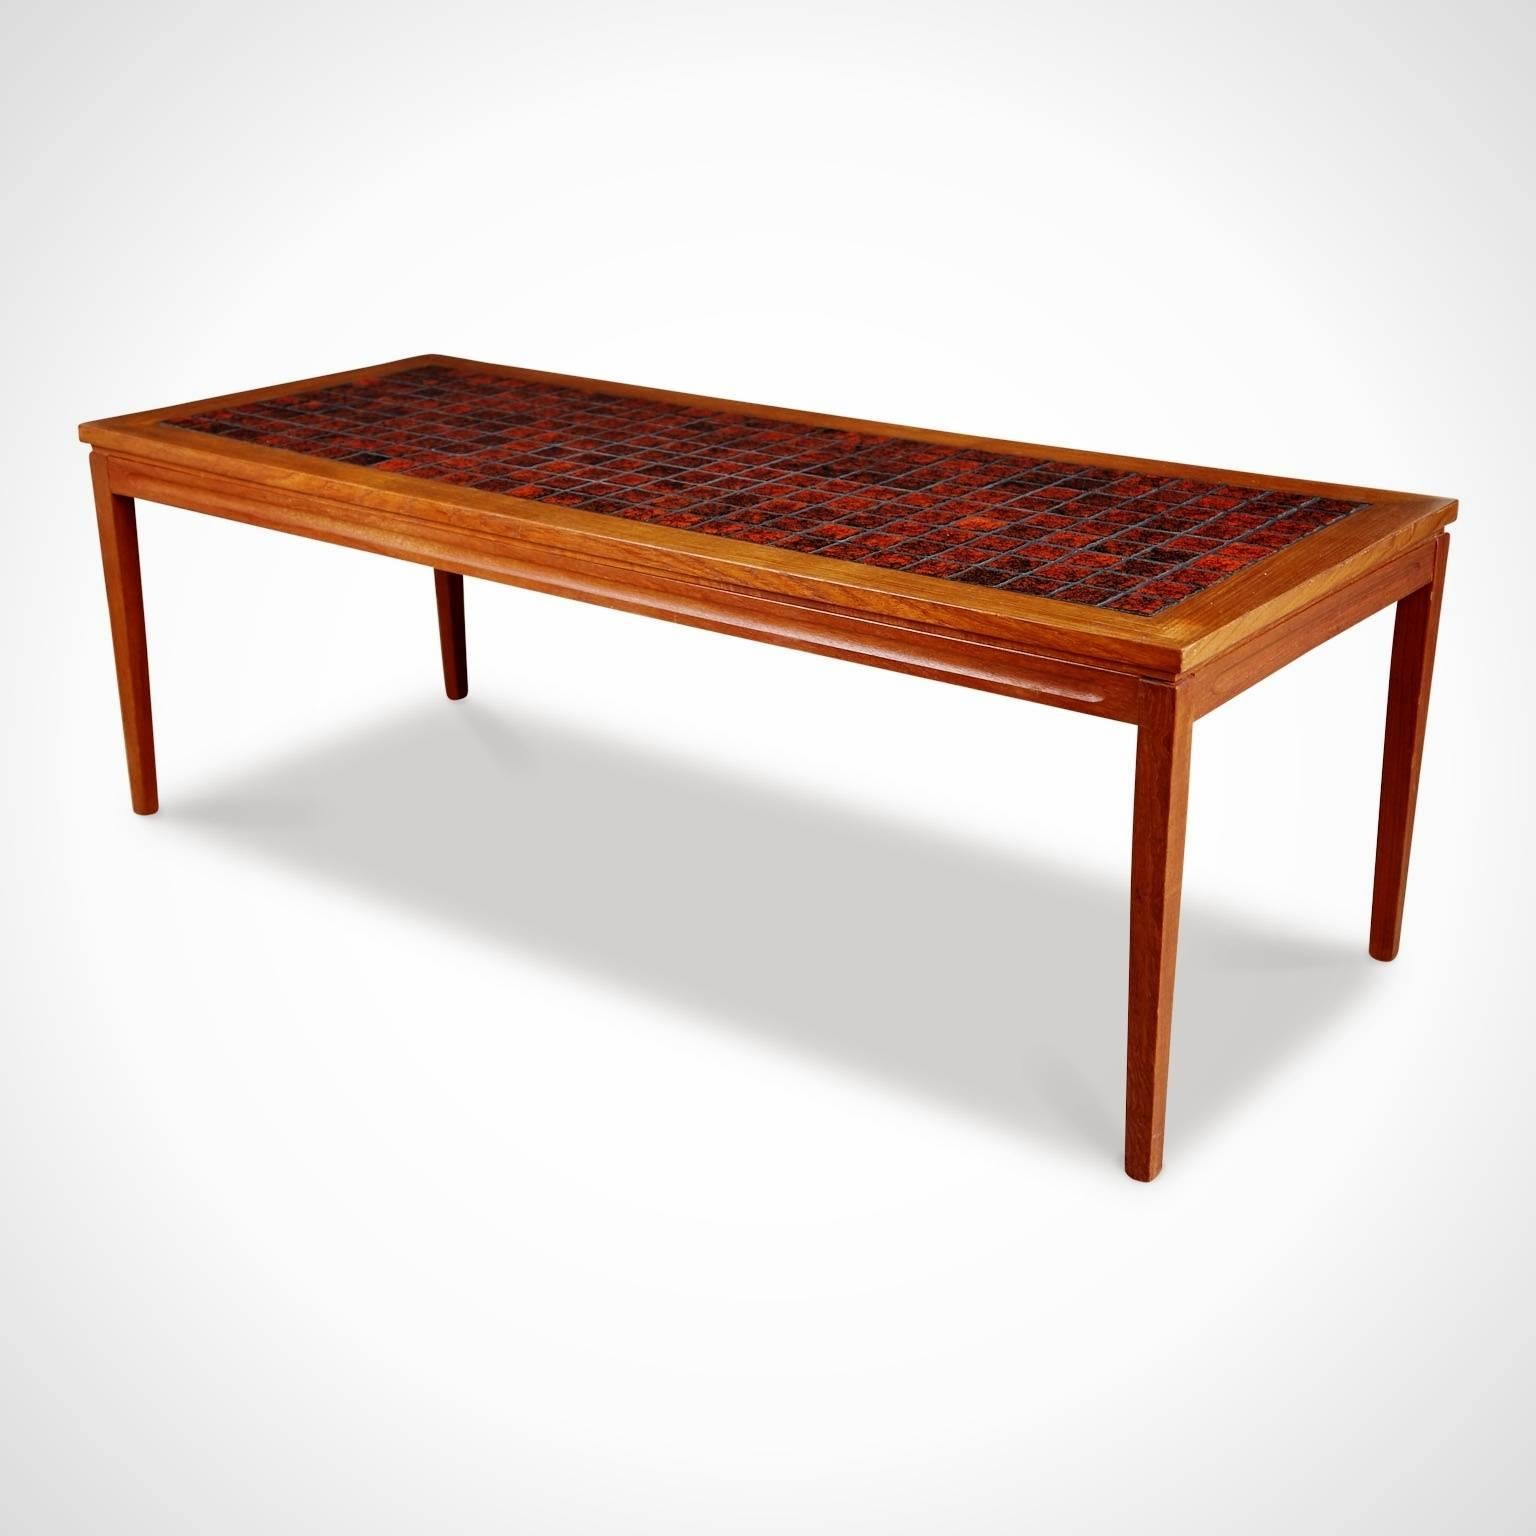 Mid-20th Century Danish Teak Coffee Table with Red Tile-Top, circa 1960